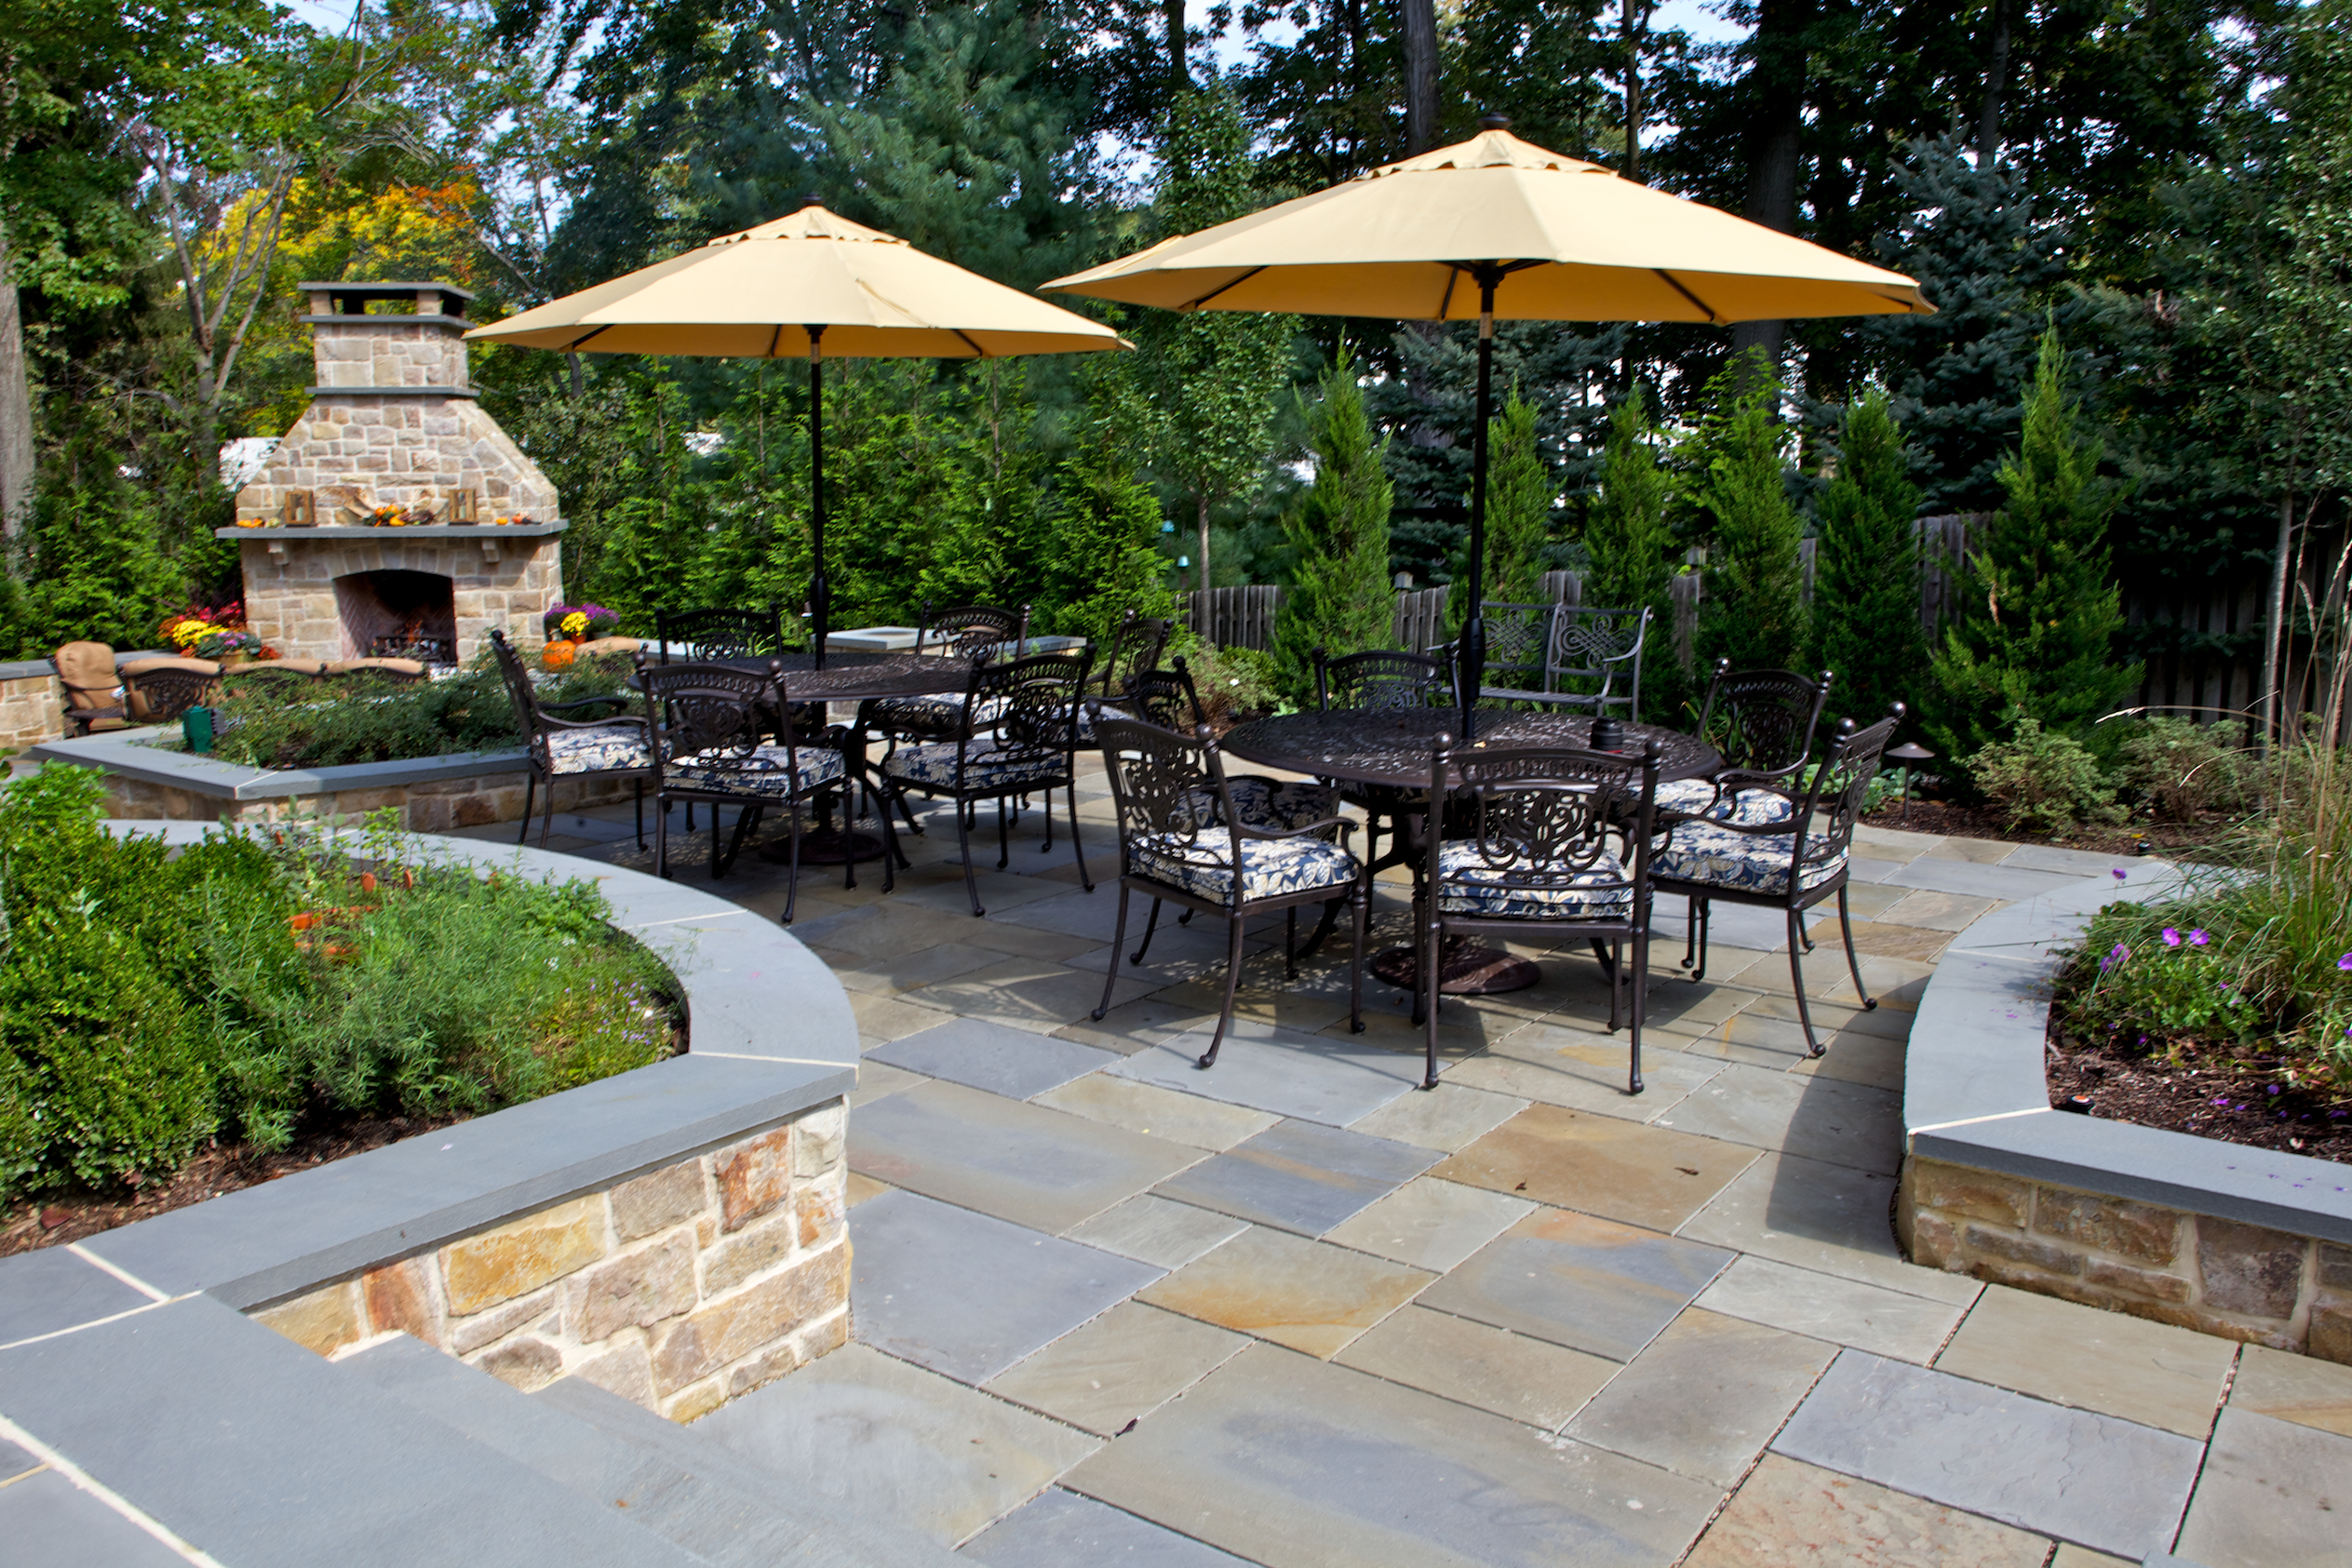 Terrific Paver Outdoor Patio Ideas with Patio Furniture